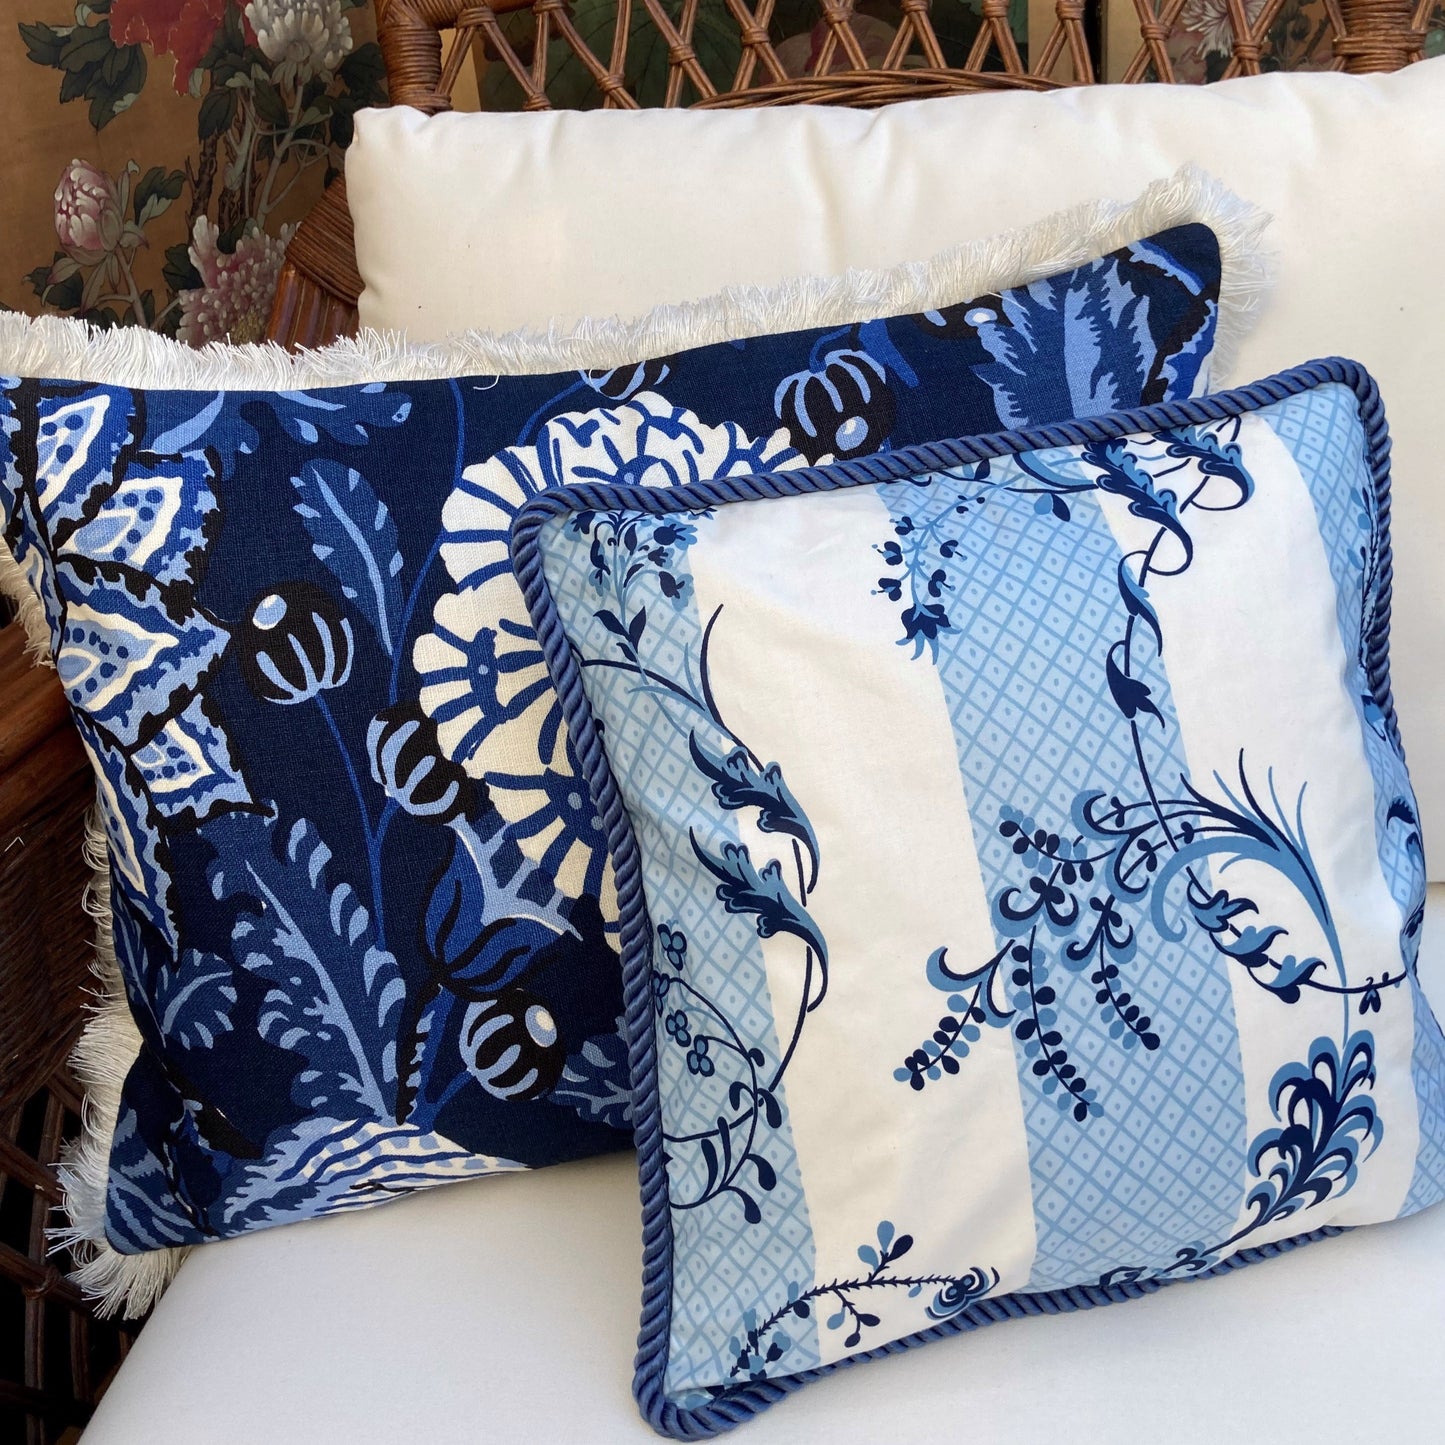 Bagatelle Serene Blue and White Trellis and Vine Stripe Decorative Pillow on Chair